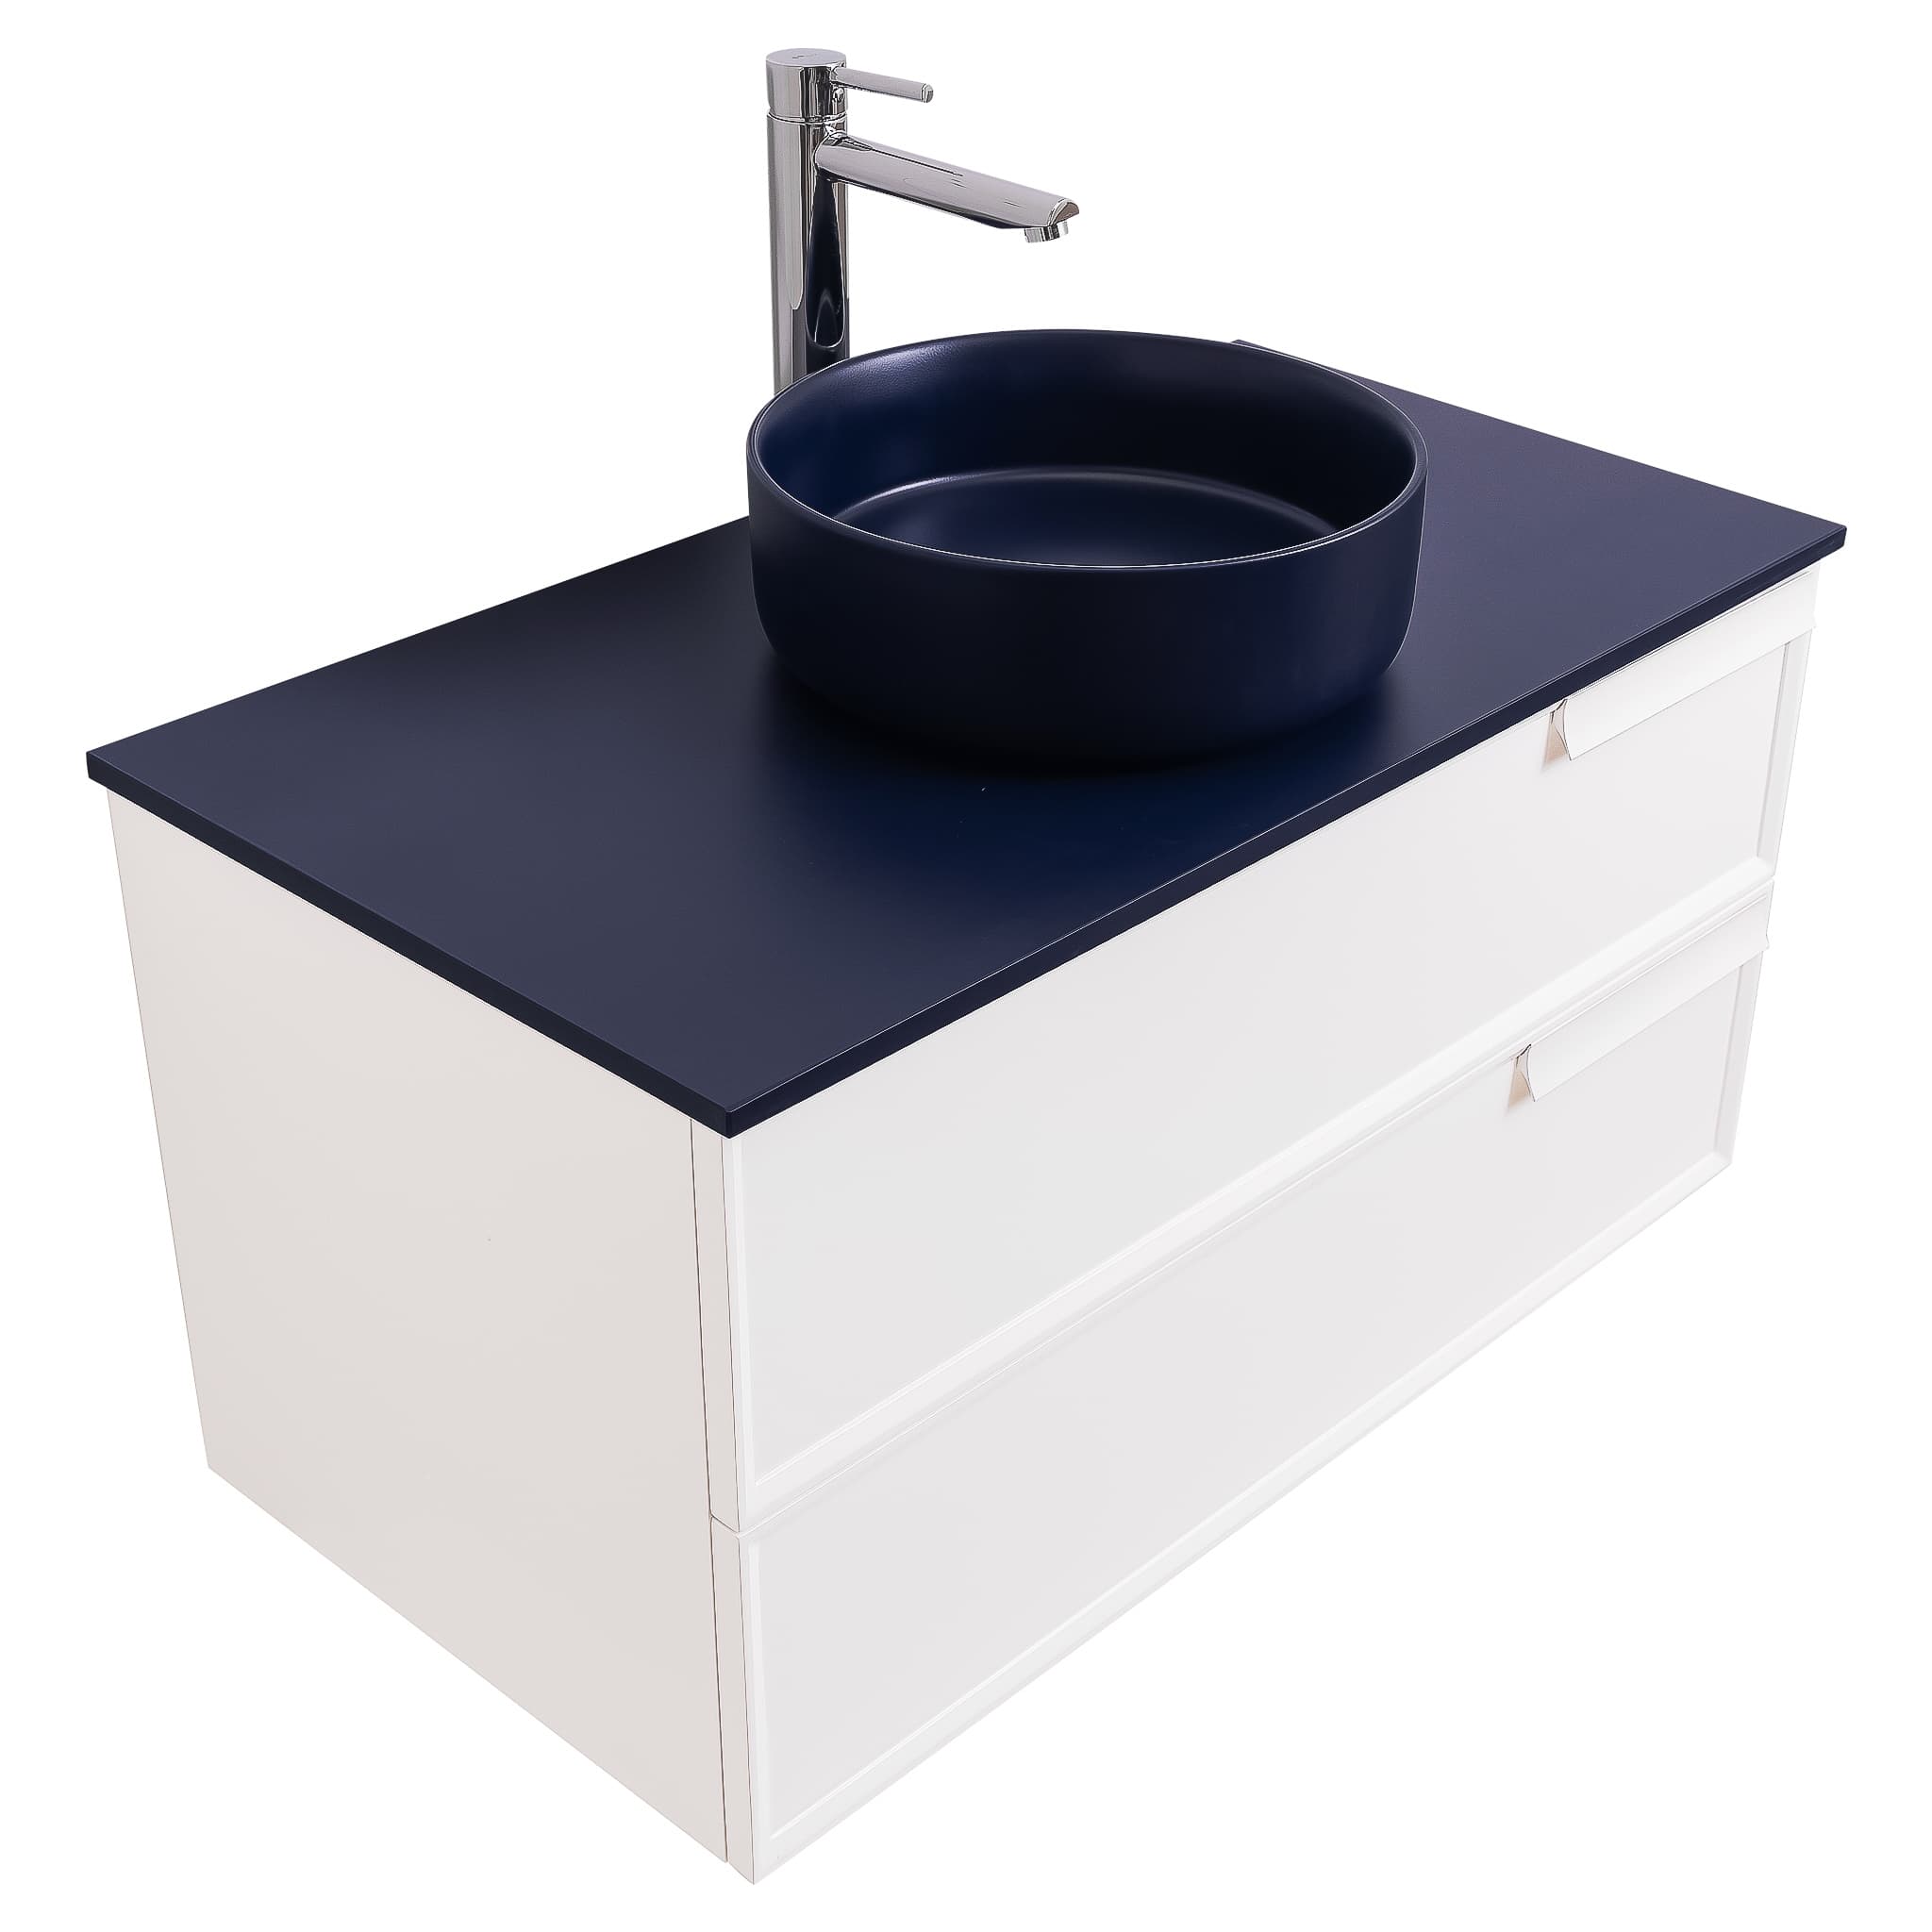 Garda 39.5 Matte White Cabinet, Ares Navy Blue Top and Ares Navy Blue Ceramic Basin, Wall Mounted Modern Vanity Set